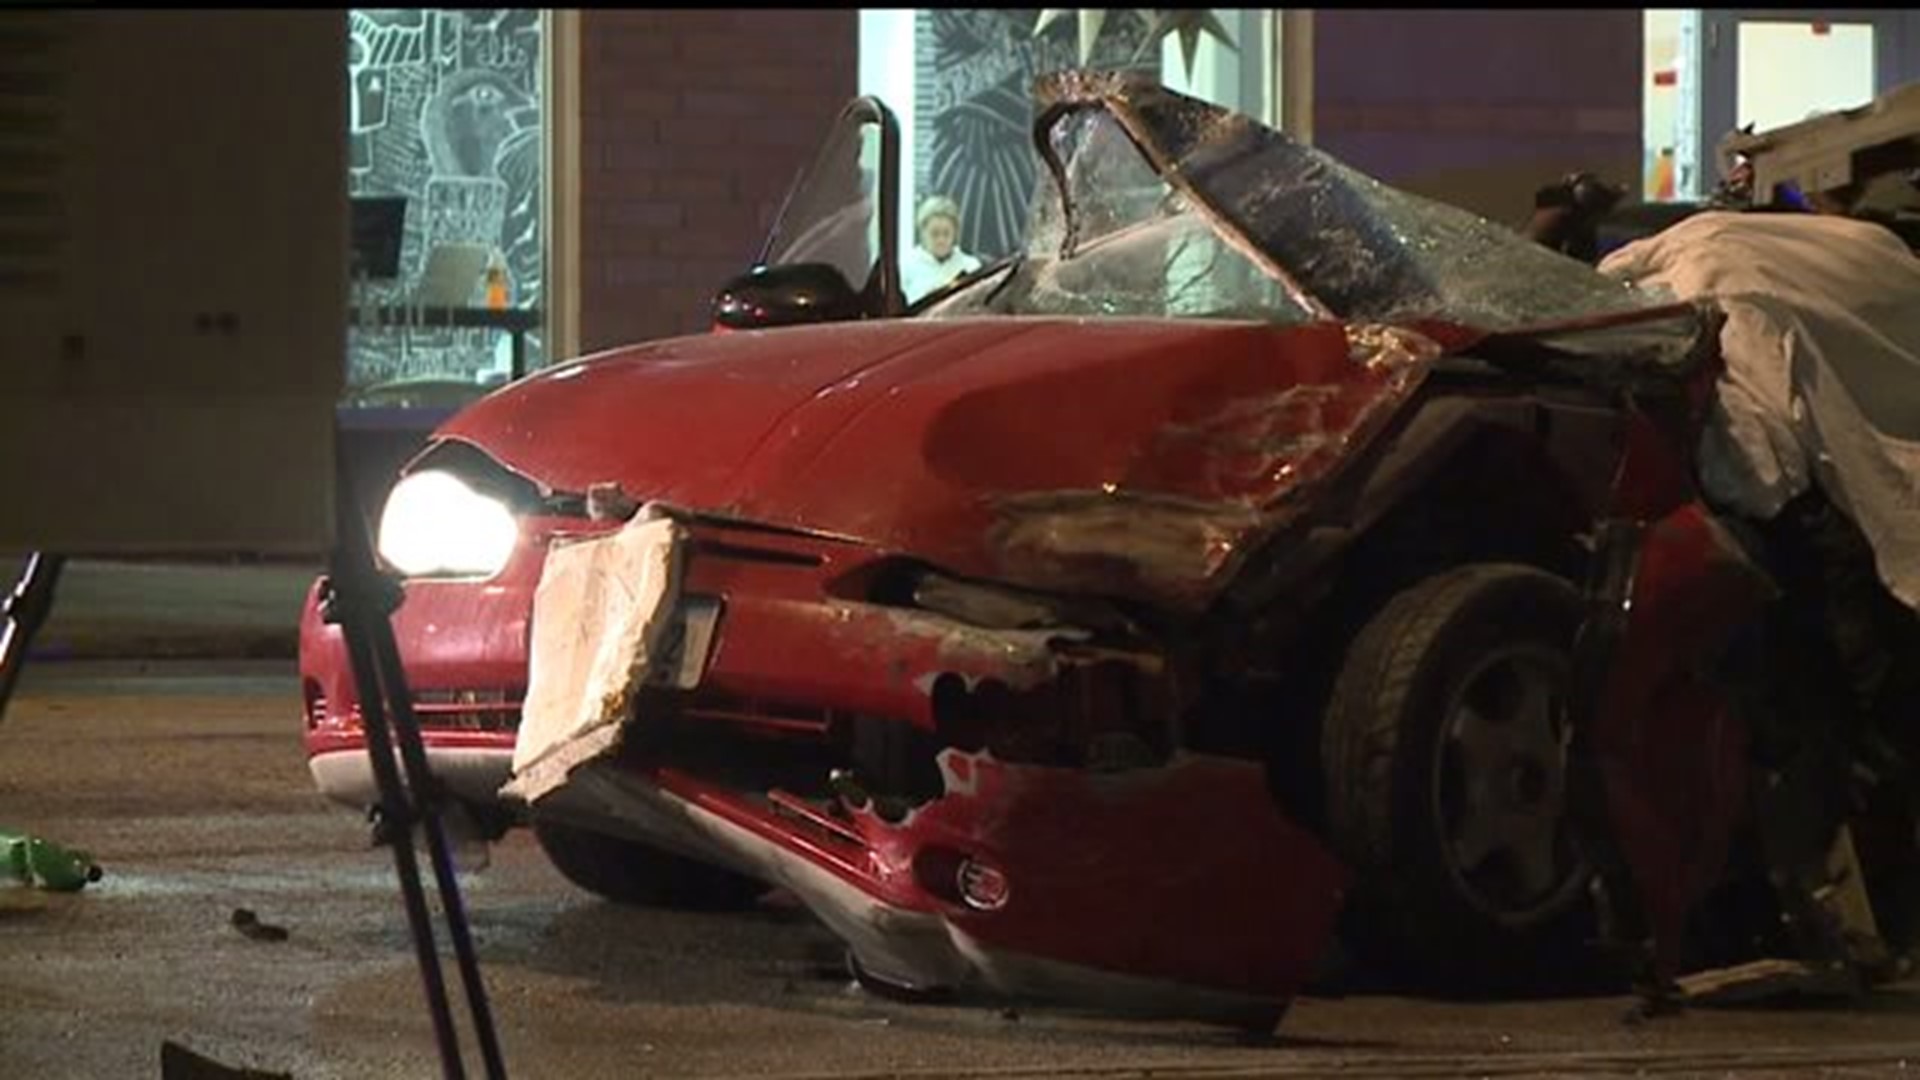 Driver charged in fatal crash due in court